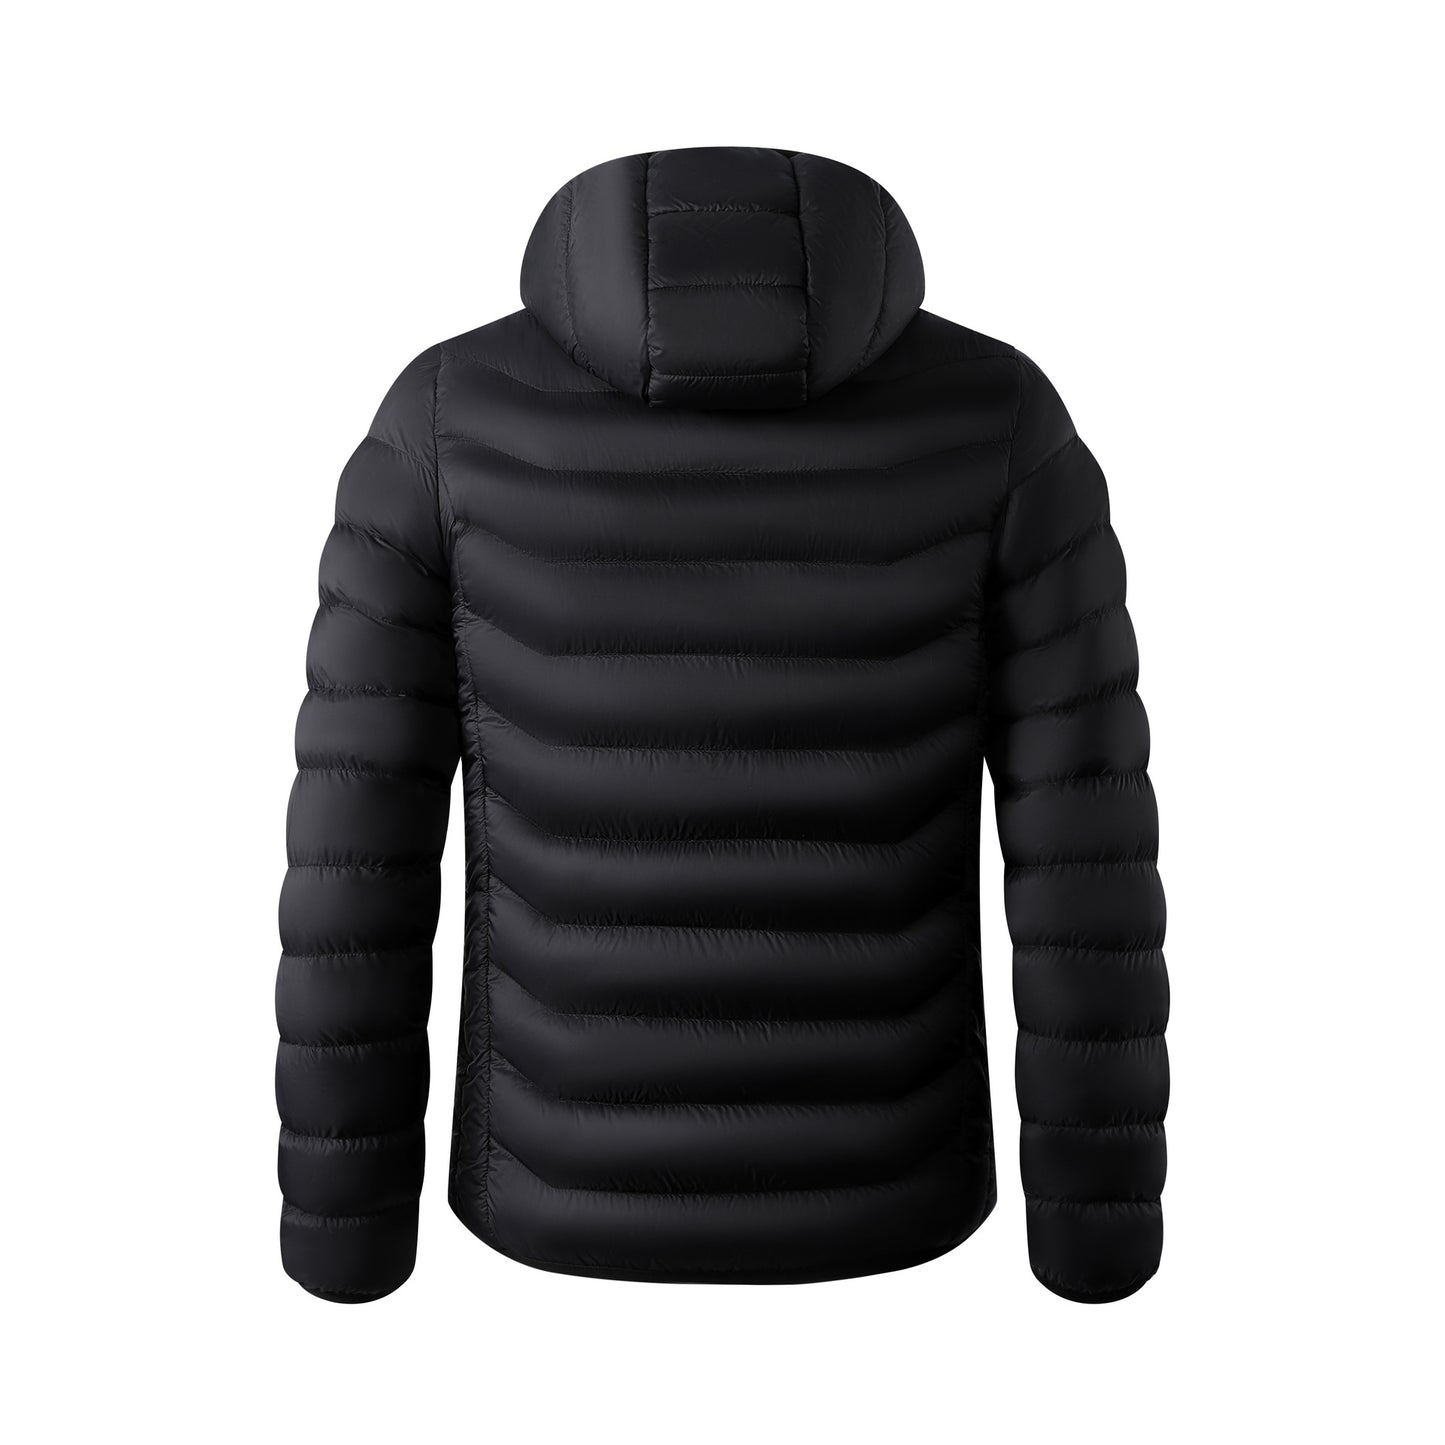 USB Electric Jacket Cotton Coat Heater Thermal Clothing Clothes for Men| Nowena